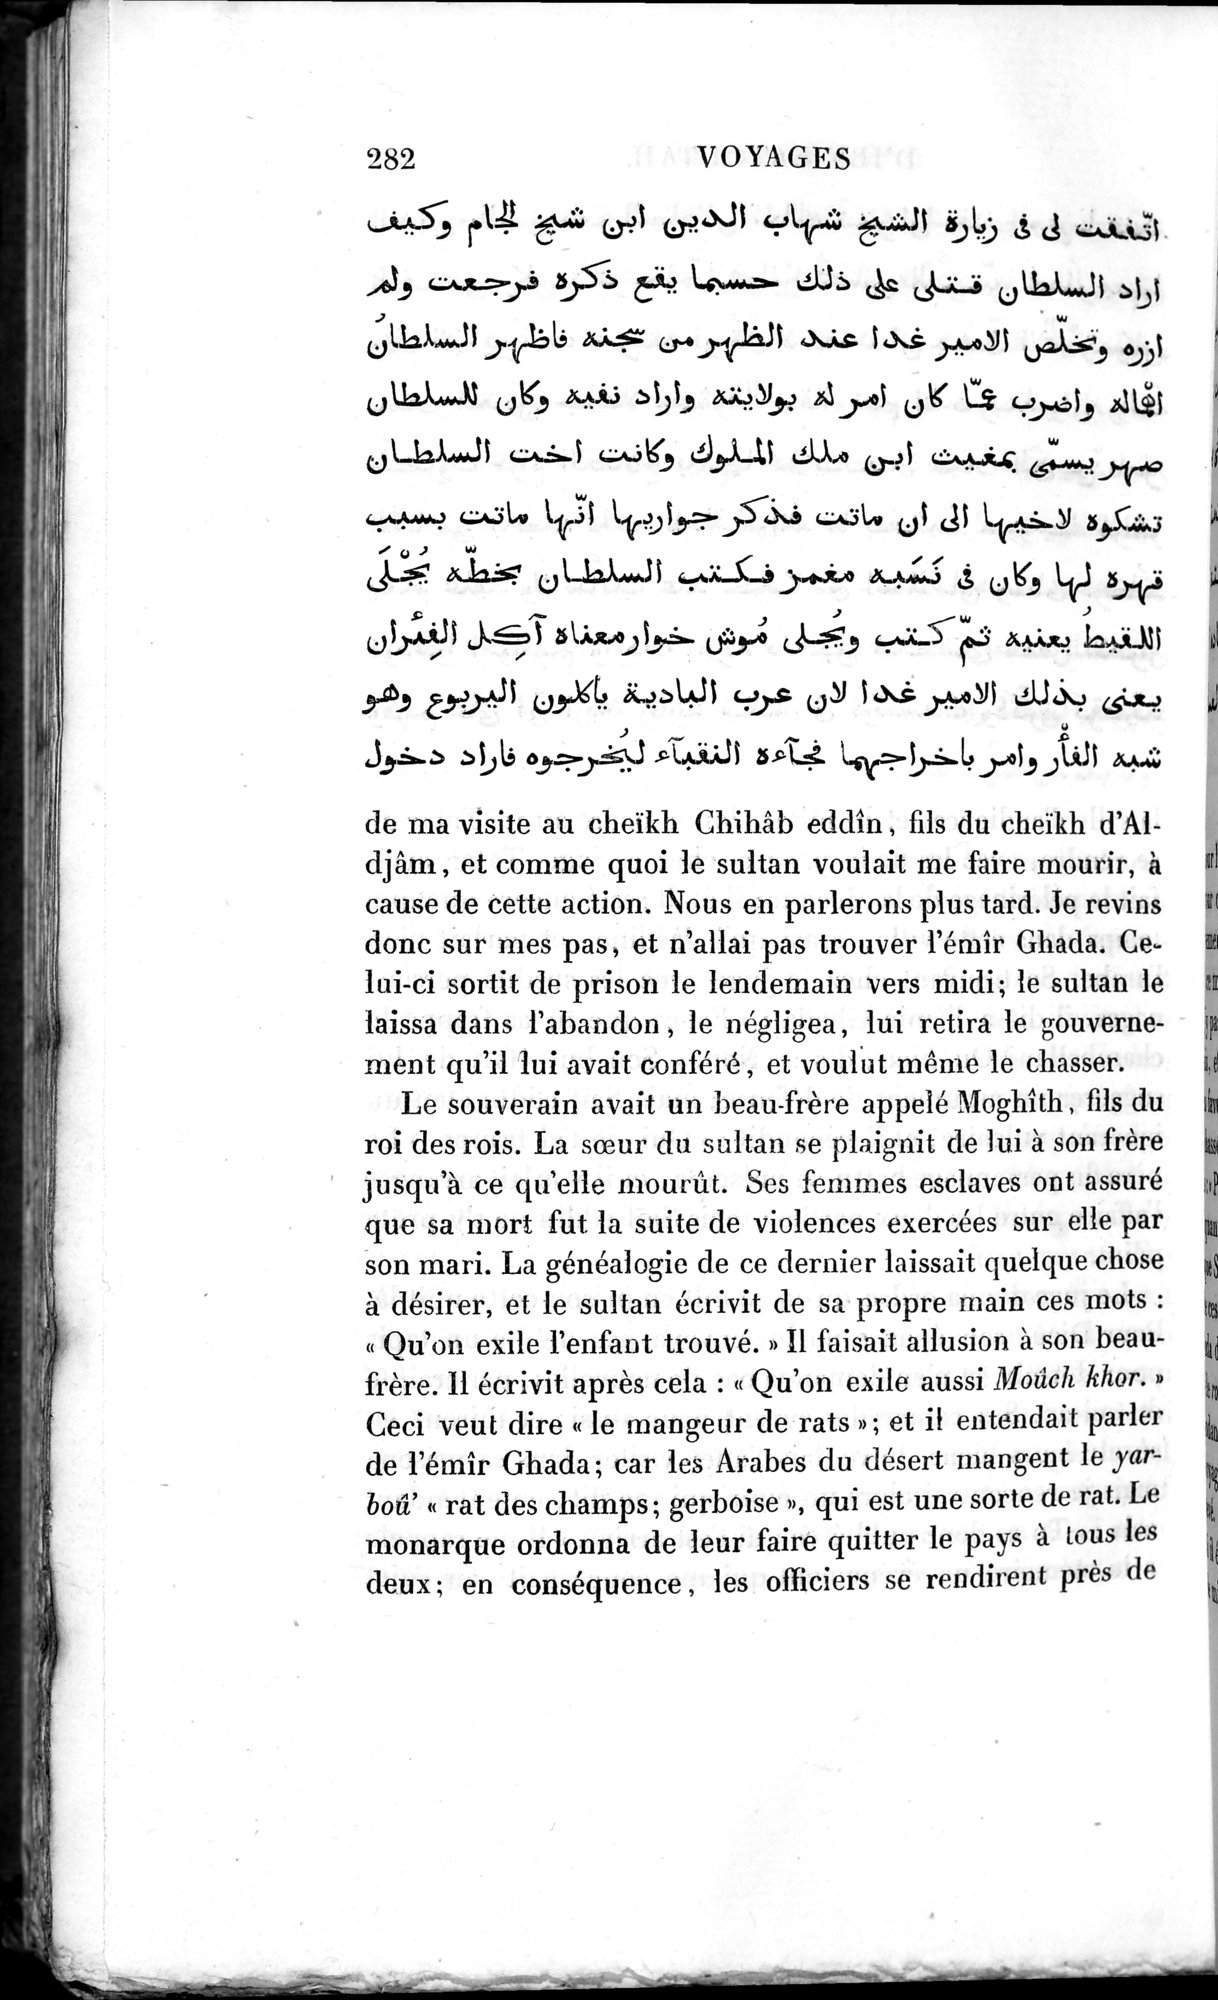 Voyages d'Ibn Batoutah : vol.3 / Page 322 (Grayscale High Resolution Image)